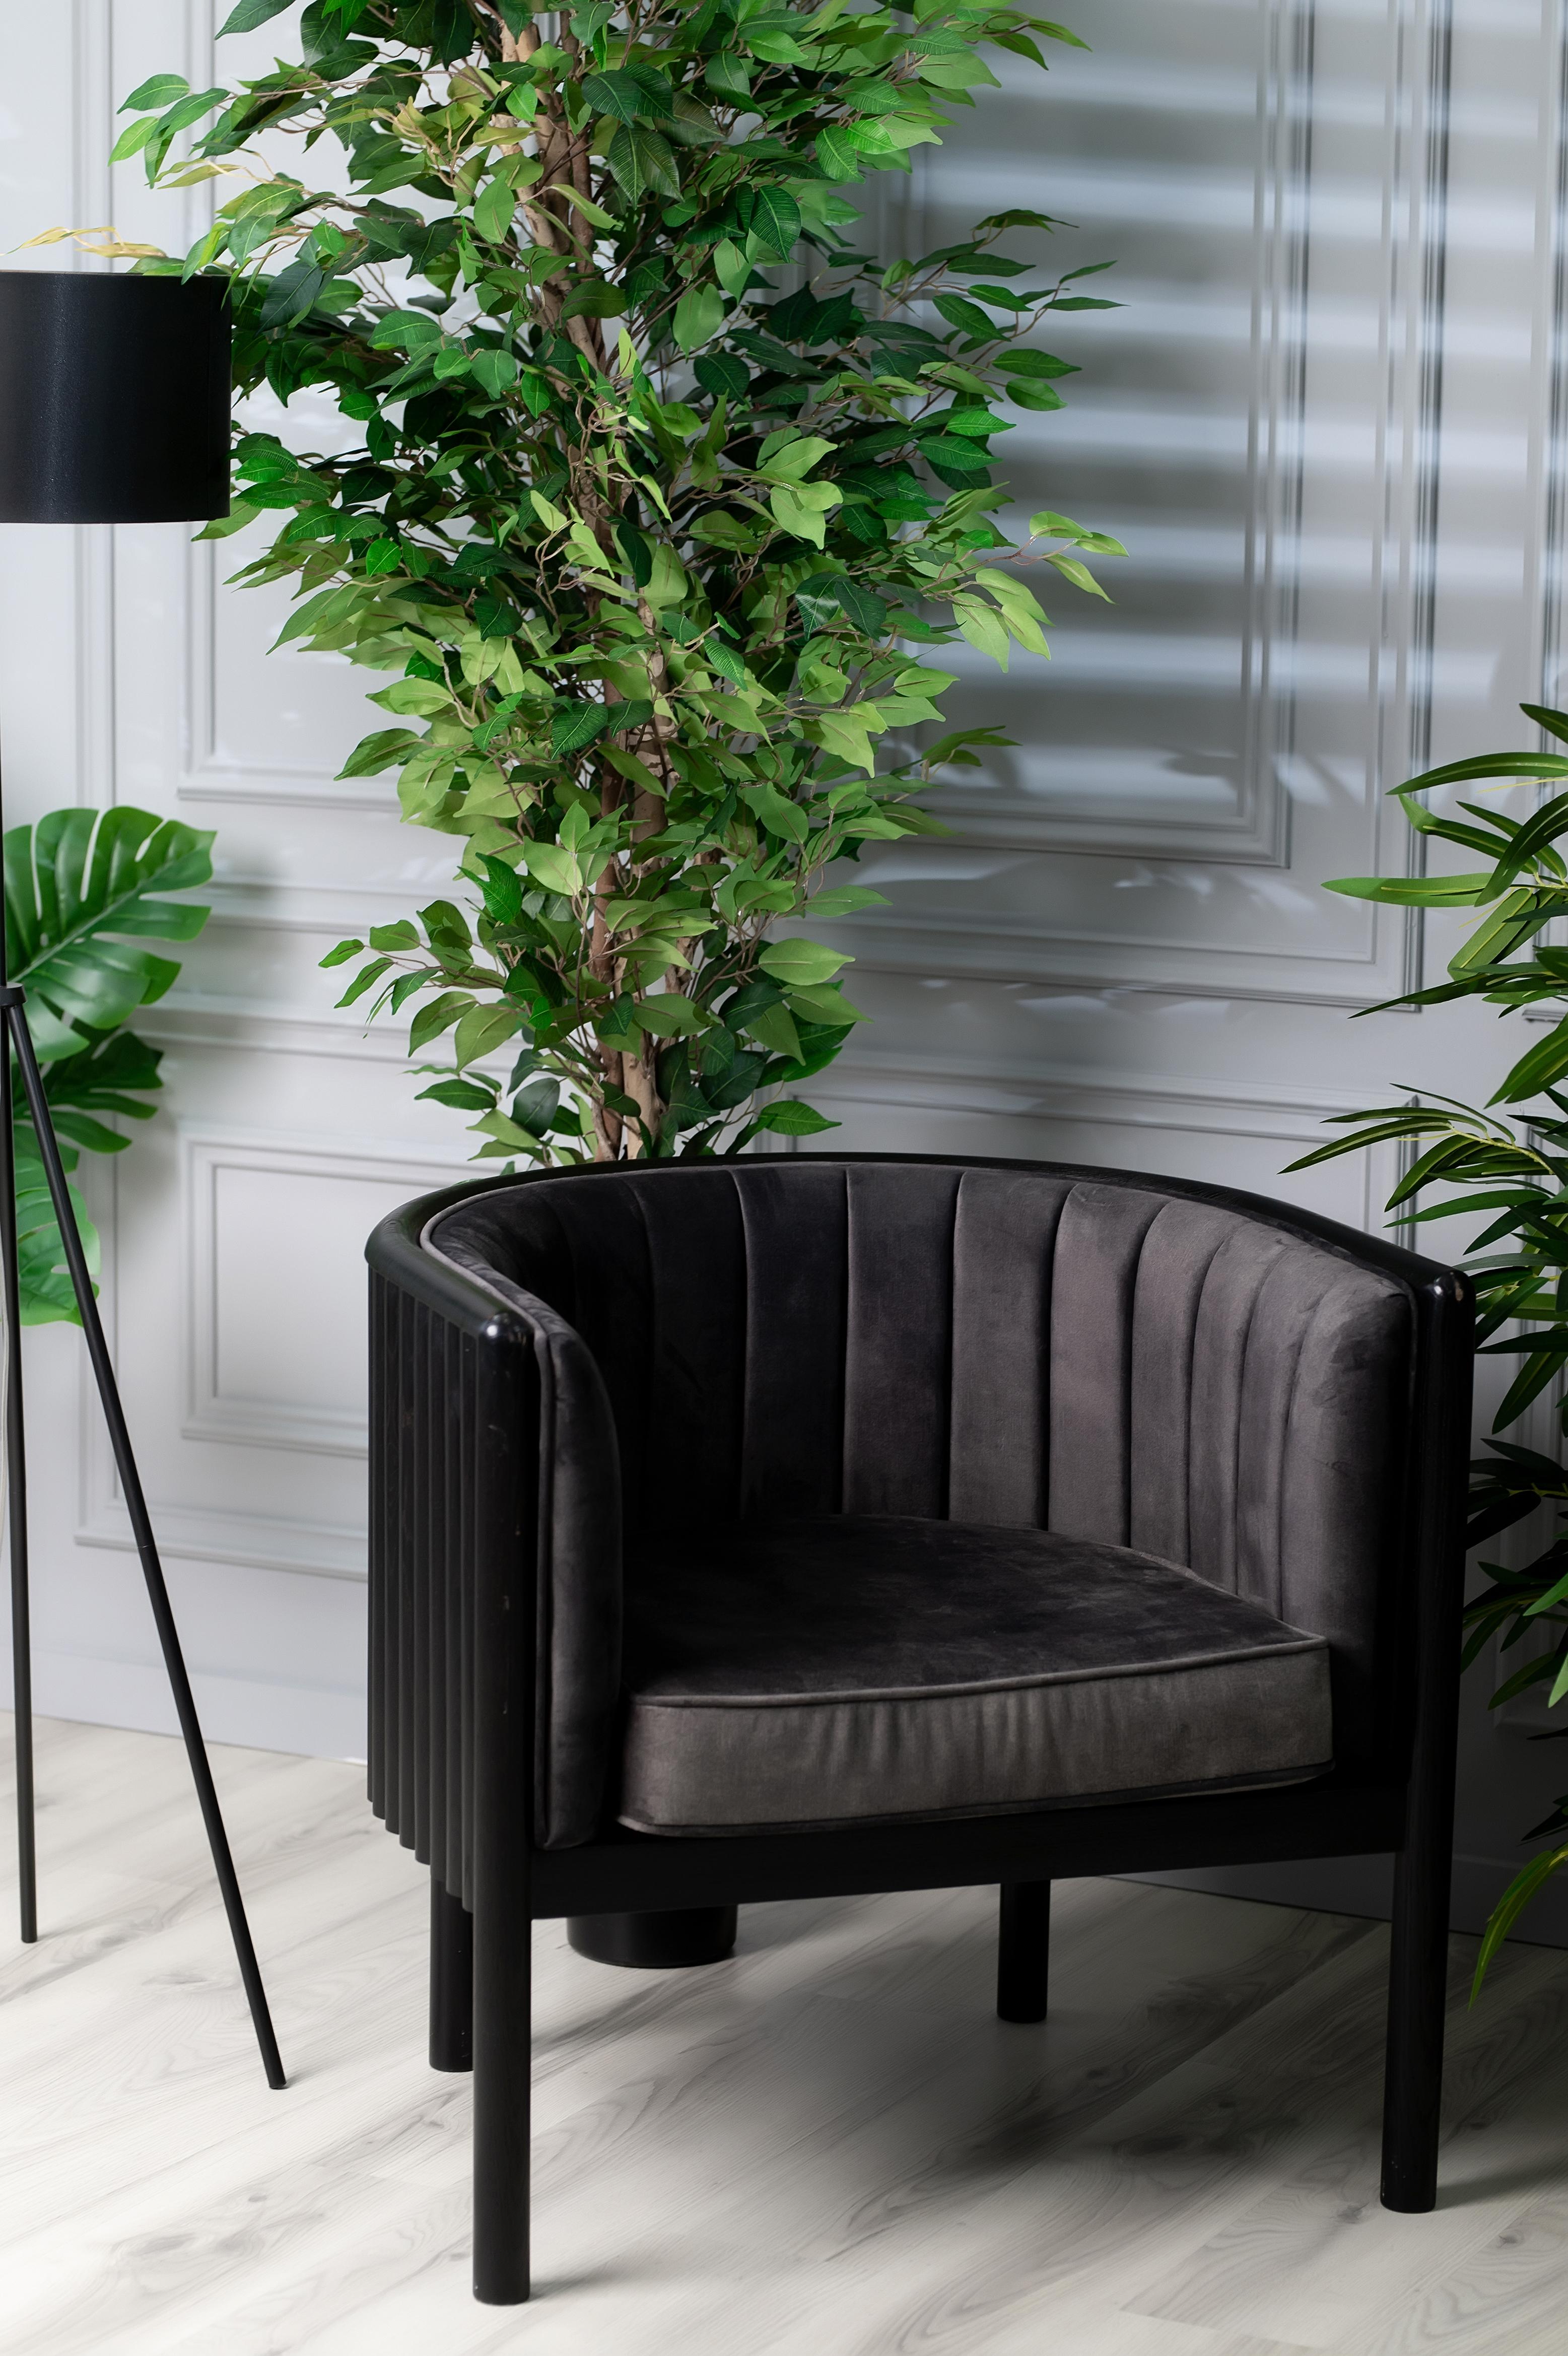 The Alton armchair is the definition of Mid-Century Modern furniture. The cylinder backings offer a unique look that isn’t duplicated in the furniture space. The emerald seat covering add a simple elegance to the piece. The comfort level will